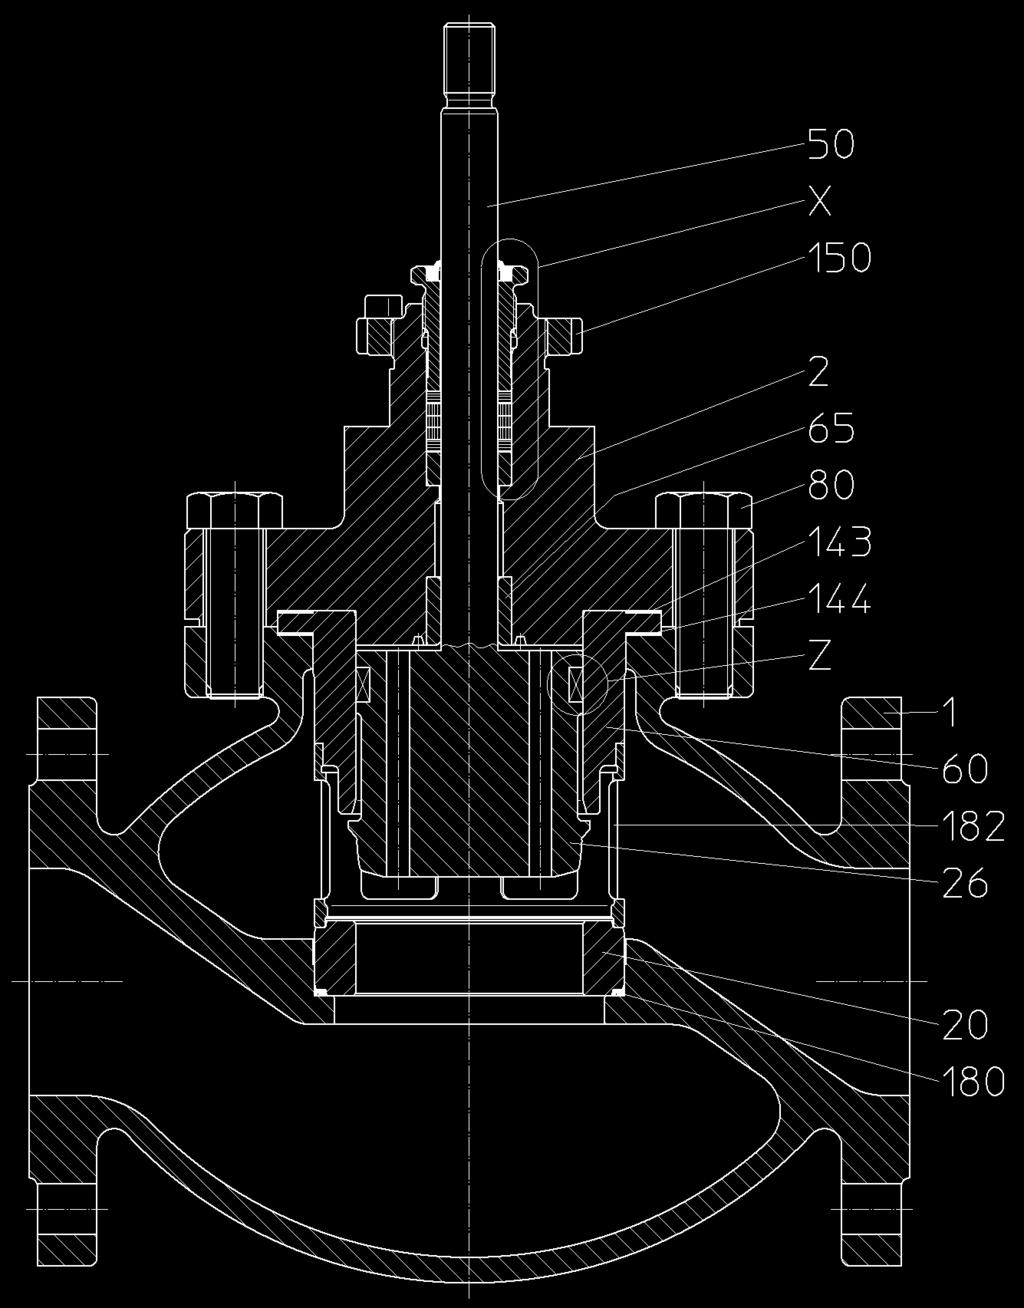 6 Sectional drawings ARCA Regler GmbH 6.9 8C7-P1 Bonnet with balancing system DEK7 and parabolic plug P1. See also [11.